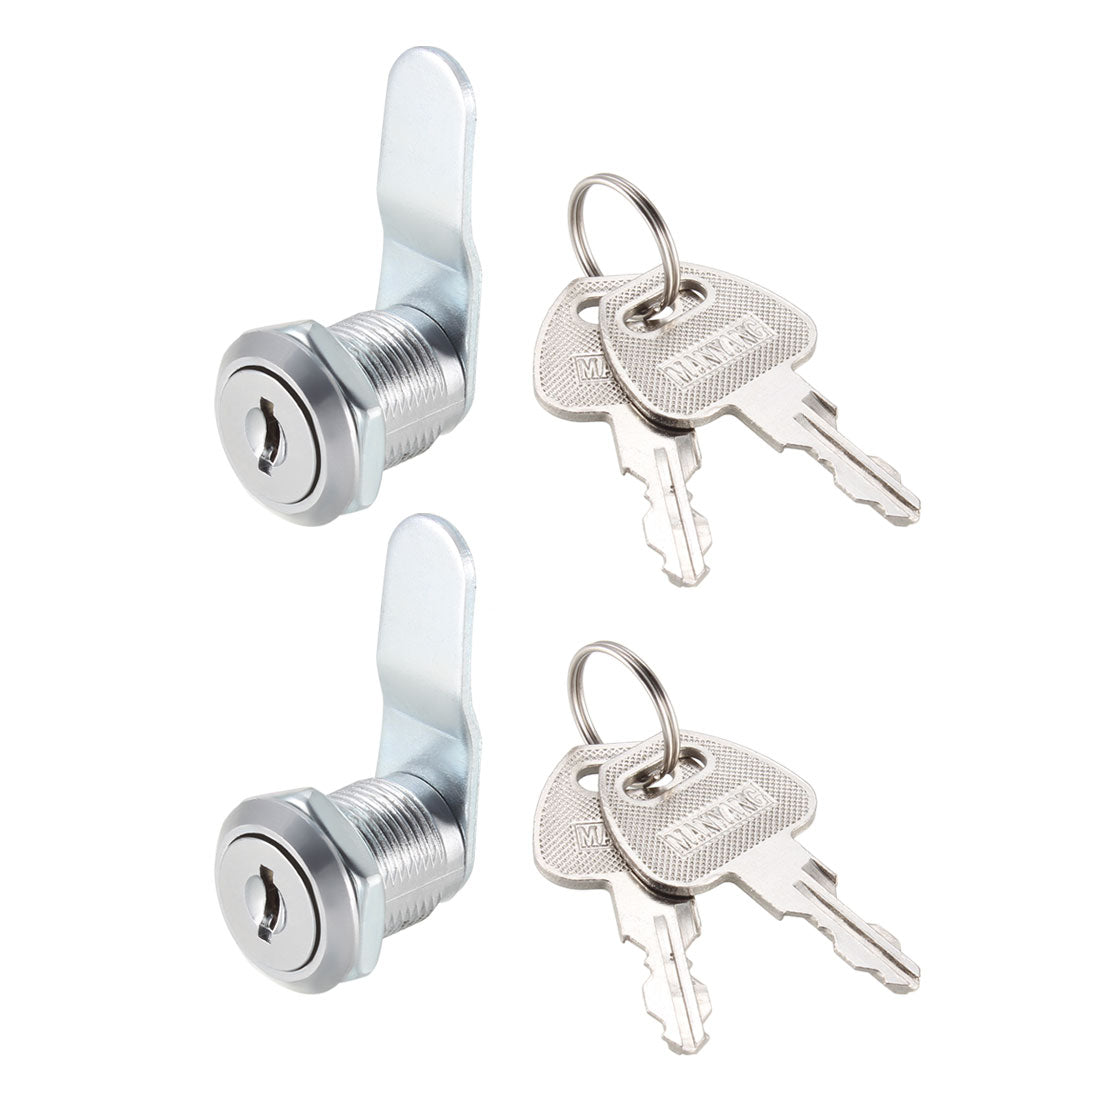 uxcell Uxcell Cam Locks 20mm Cylinder Length Fit on Max 1/2-inch Panel Keyed Different 2Pcs